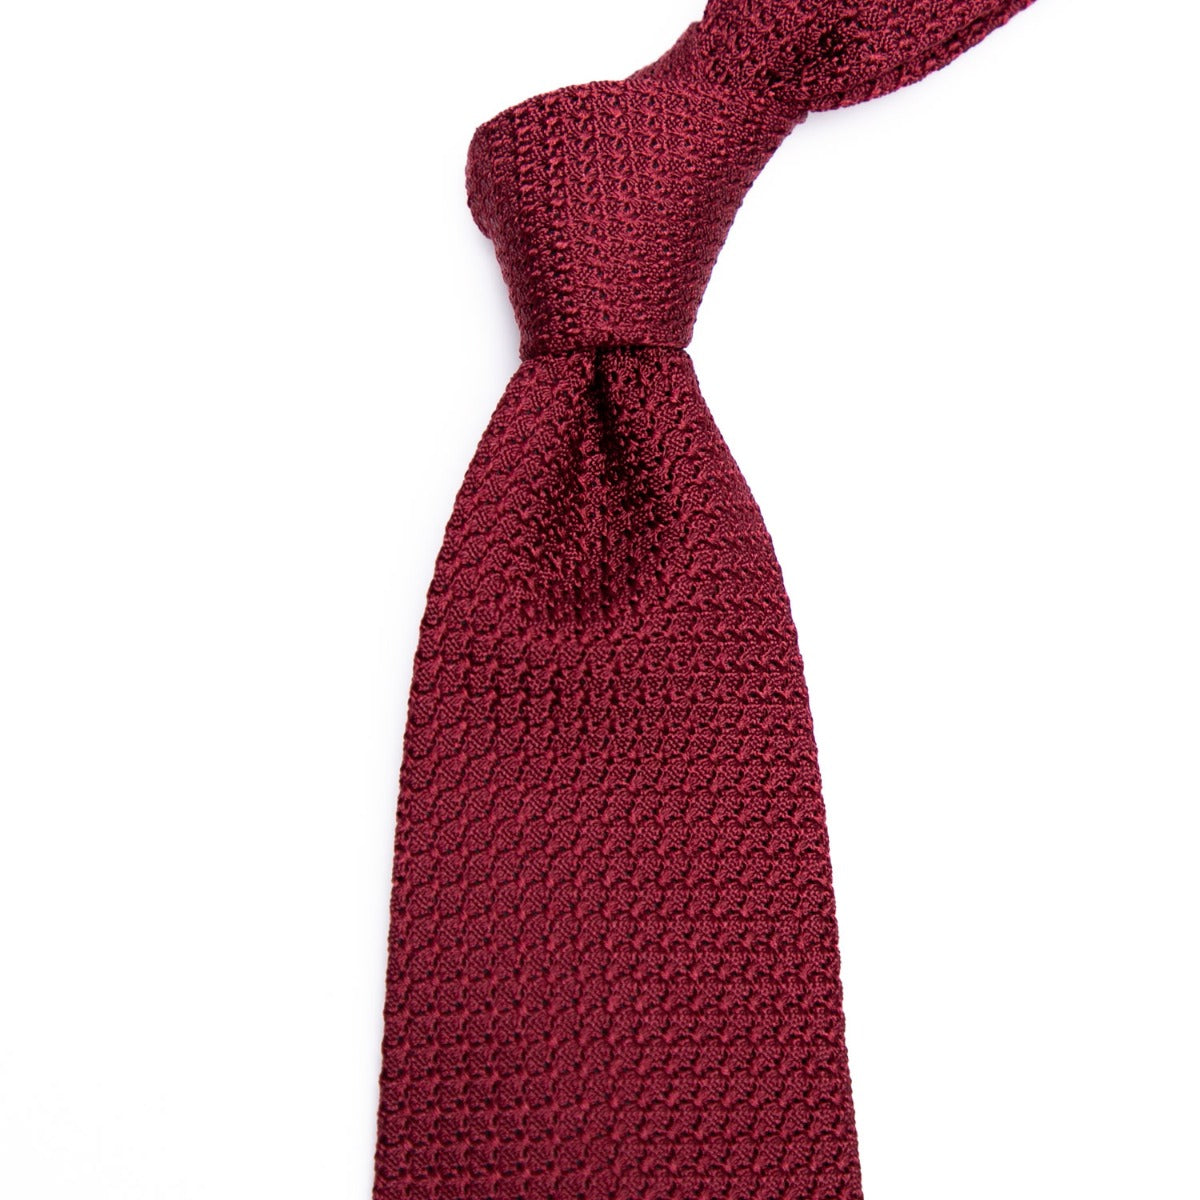 Handmade Sovereign Grade Grenadine Grossa Ruby Tie by KirbyAllison.com on a white background of exceptional quality.